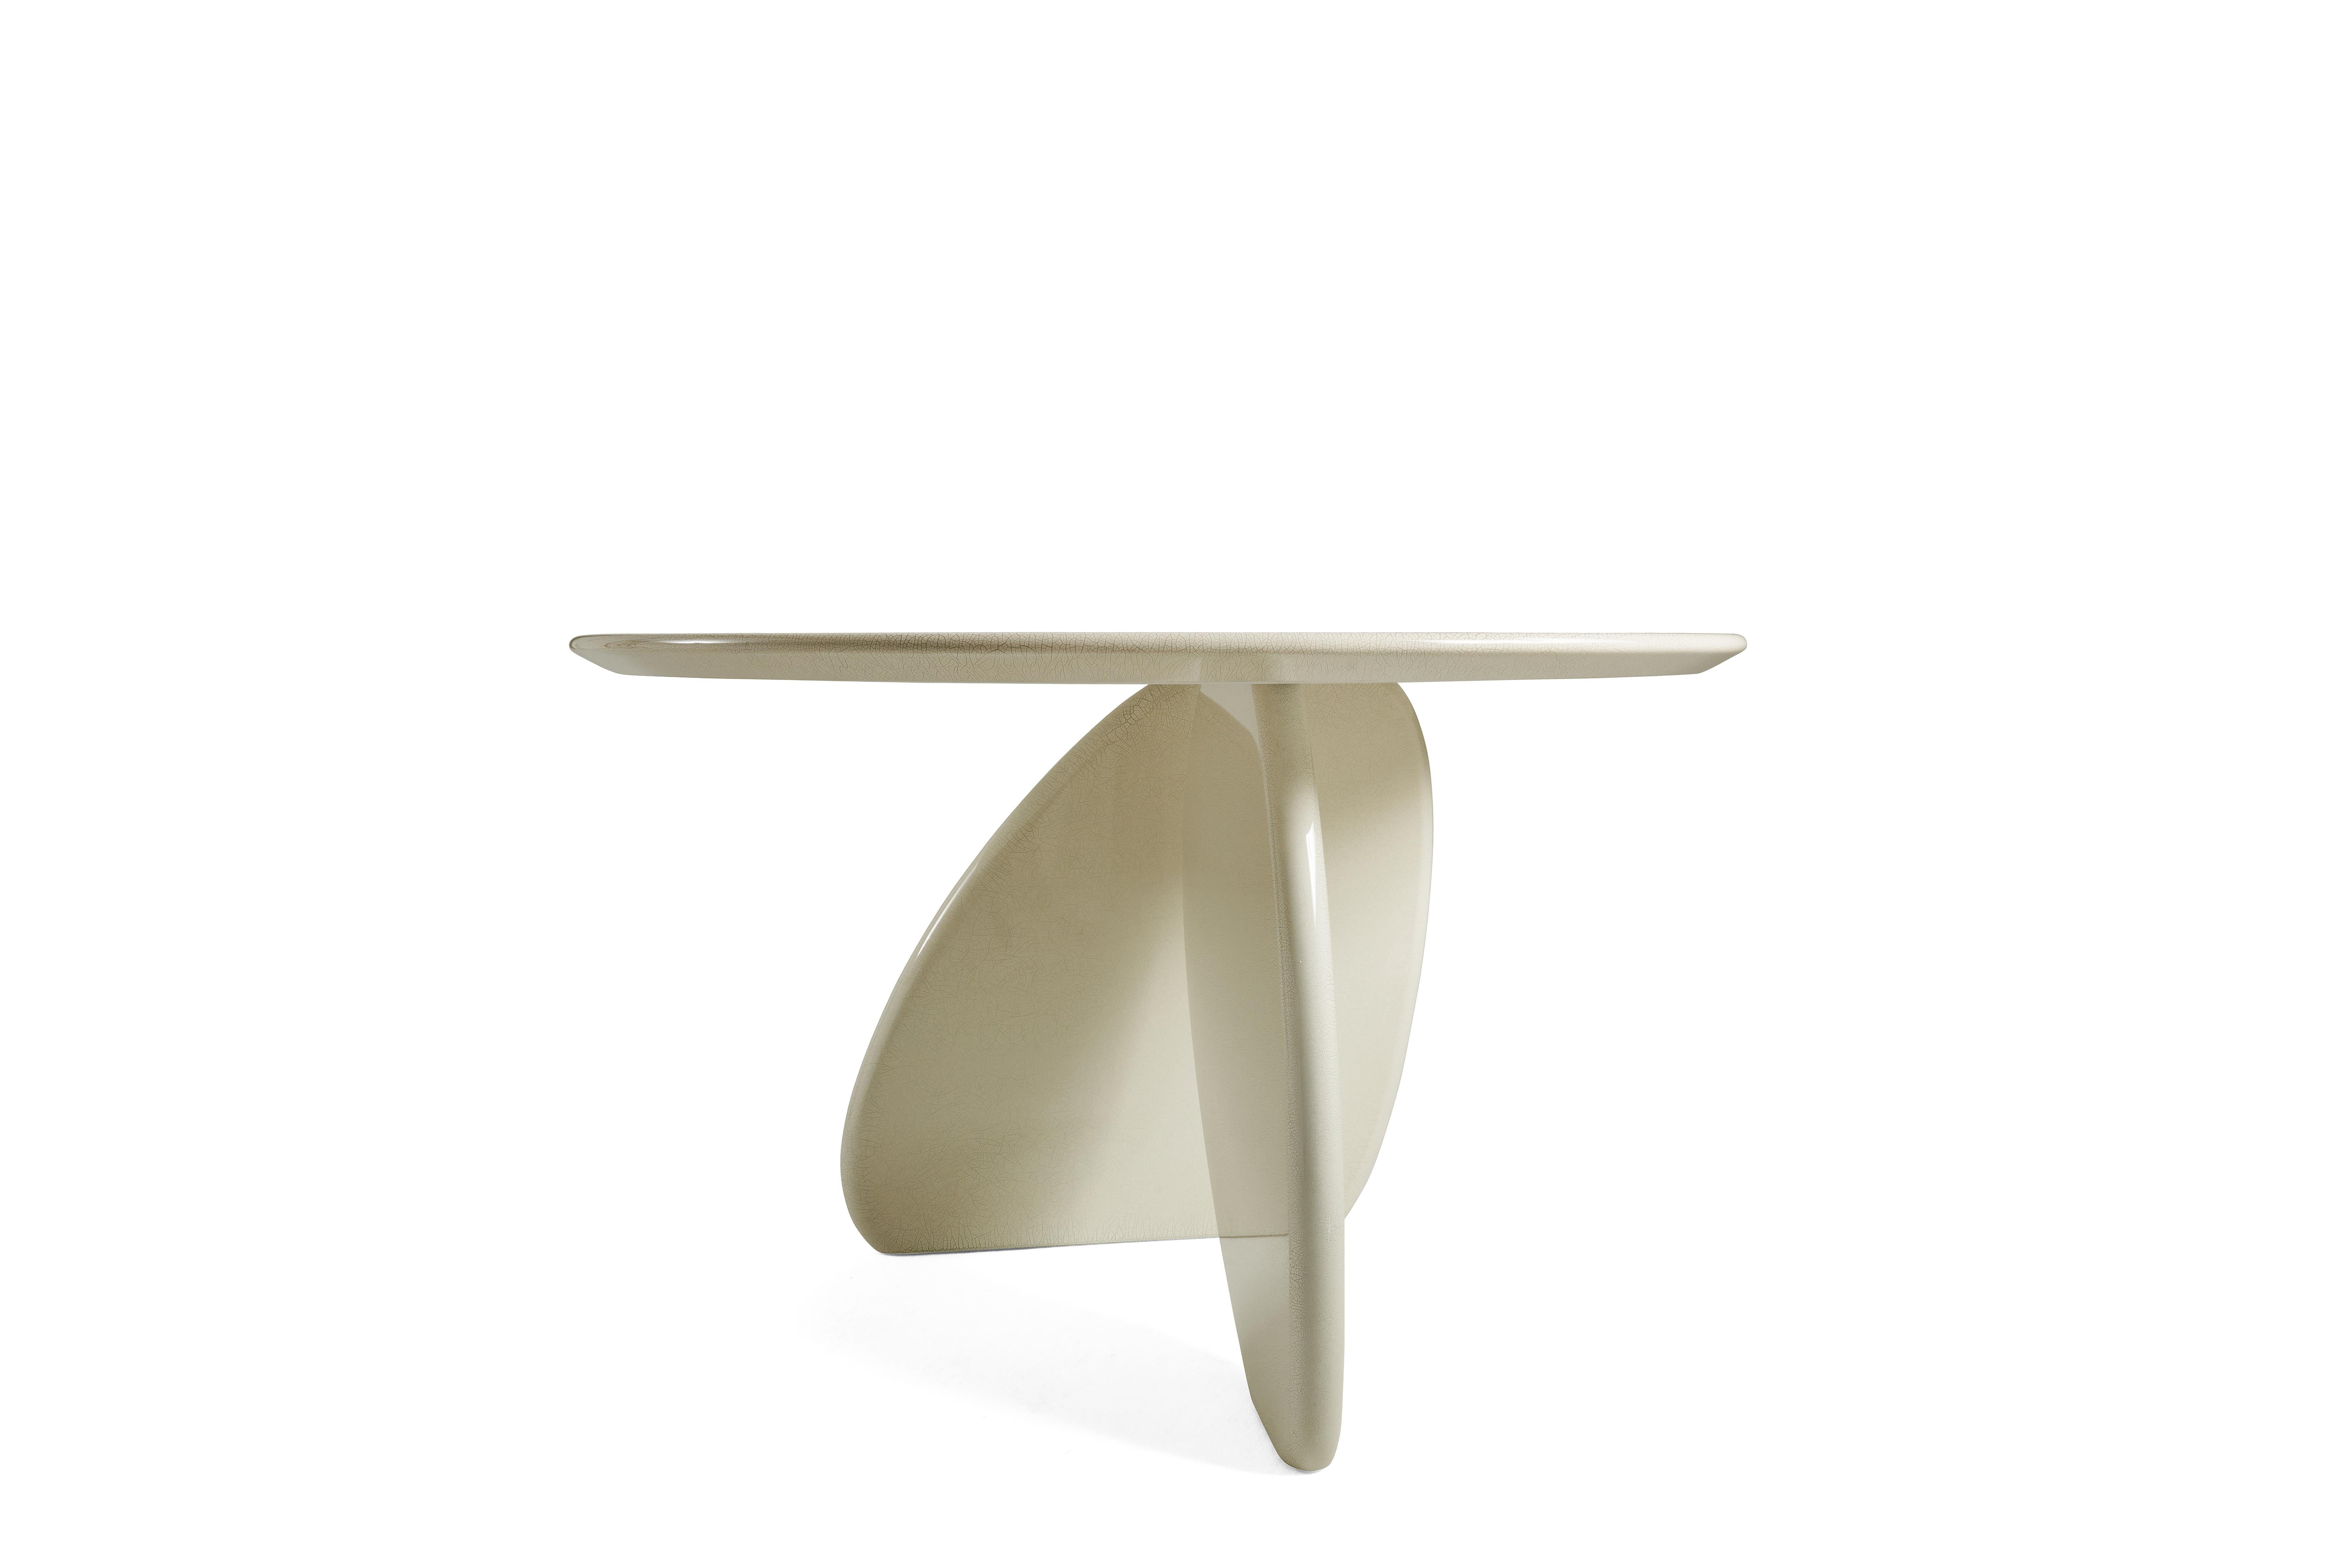 Italian Aldabra Table with Eggshell Finishing by Roberto Cavalli Home Interiors For Sale